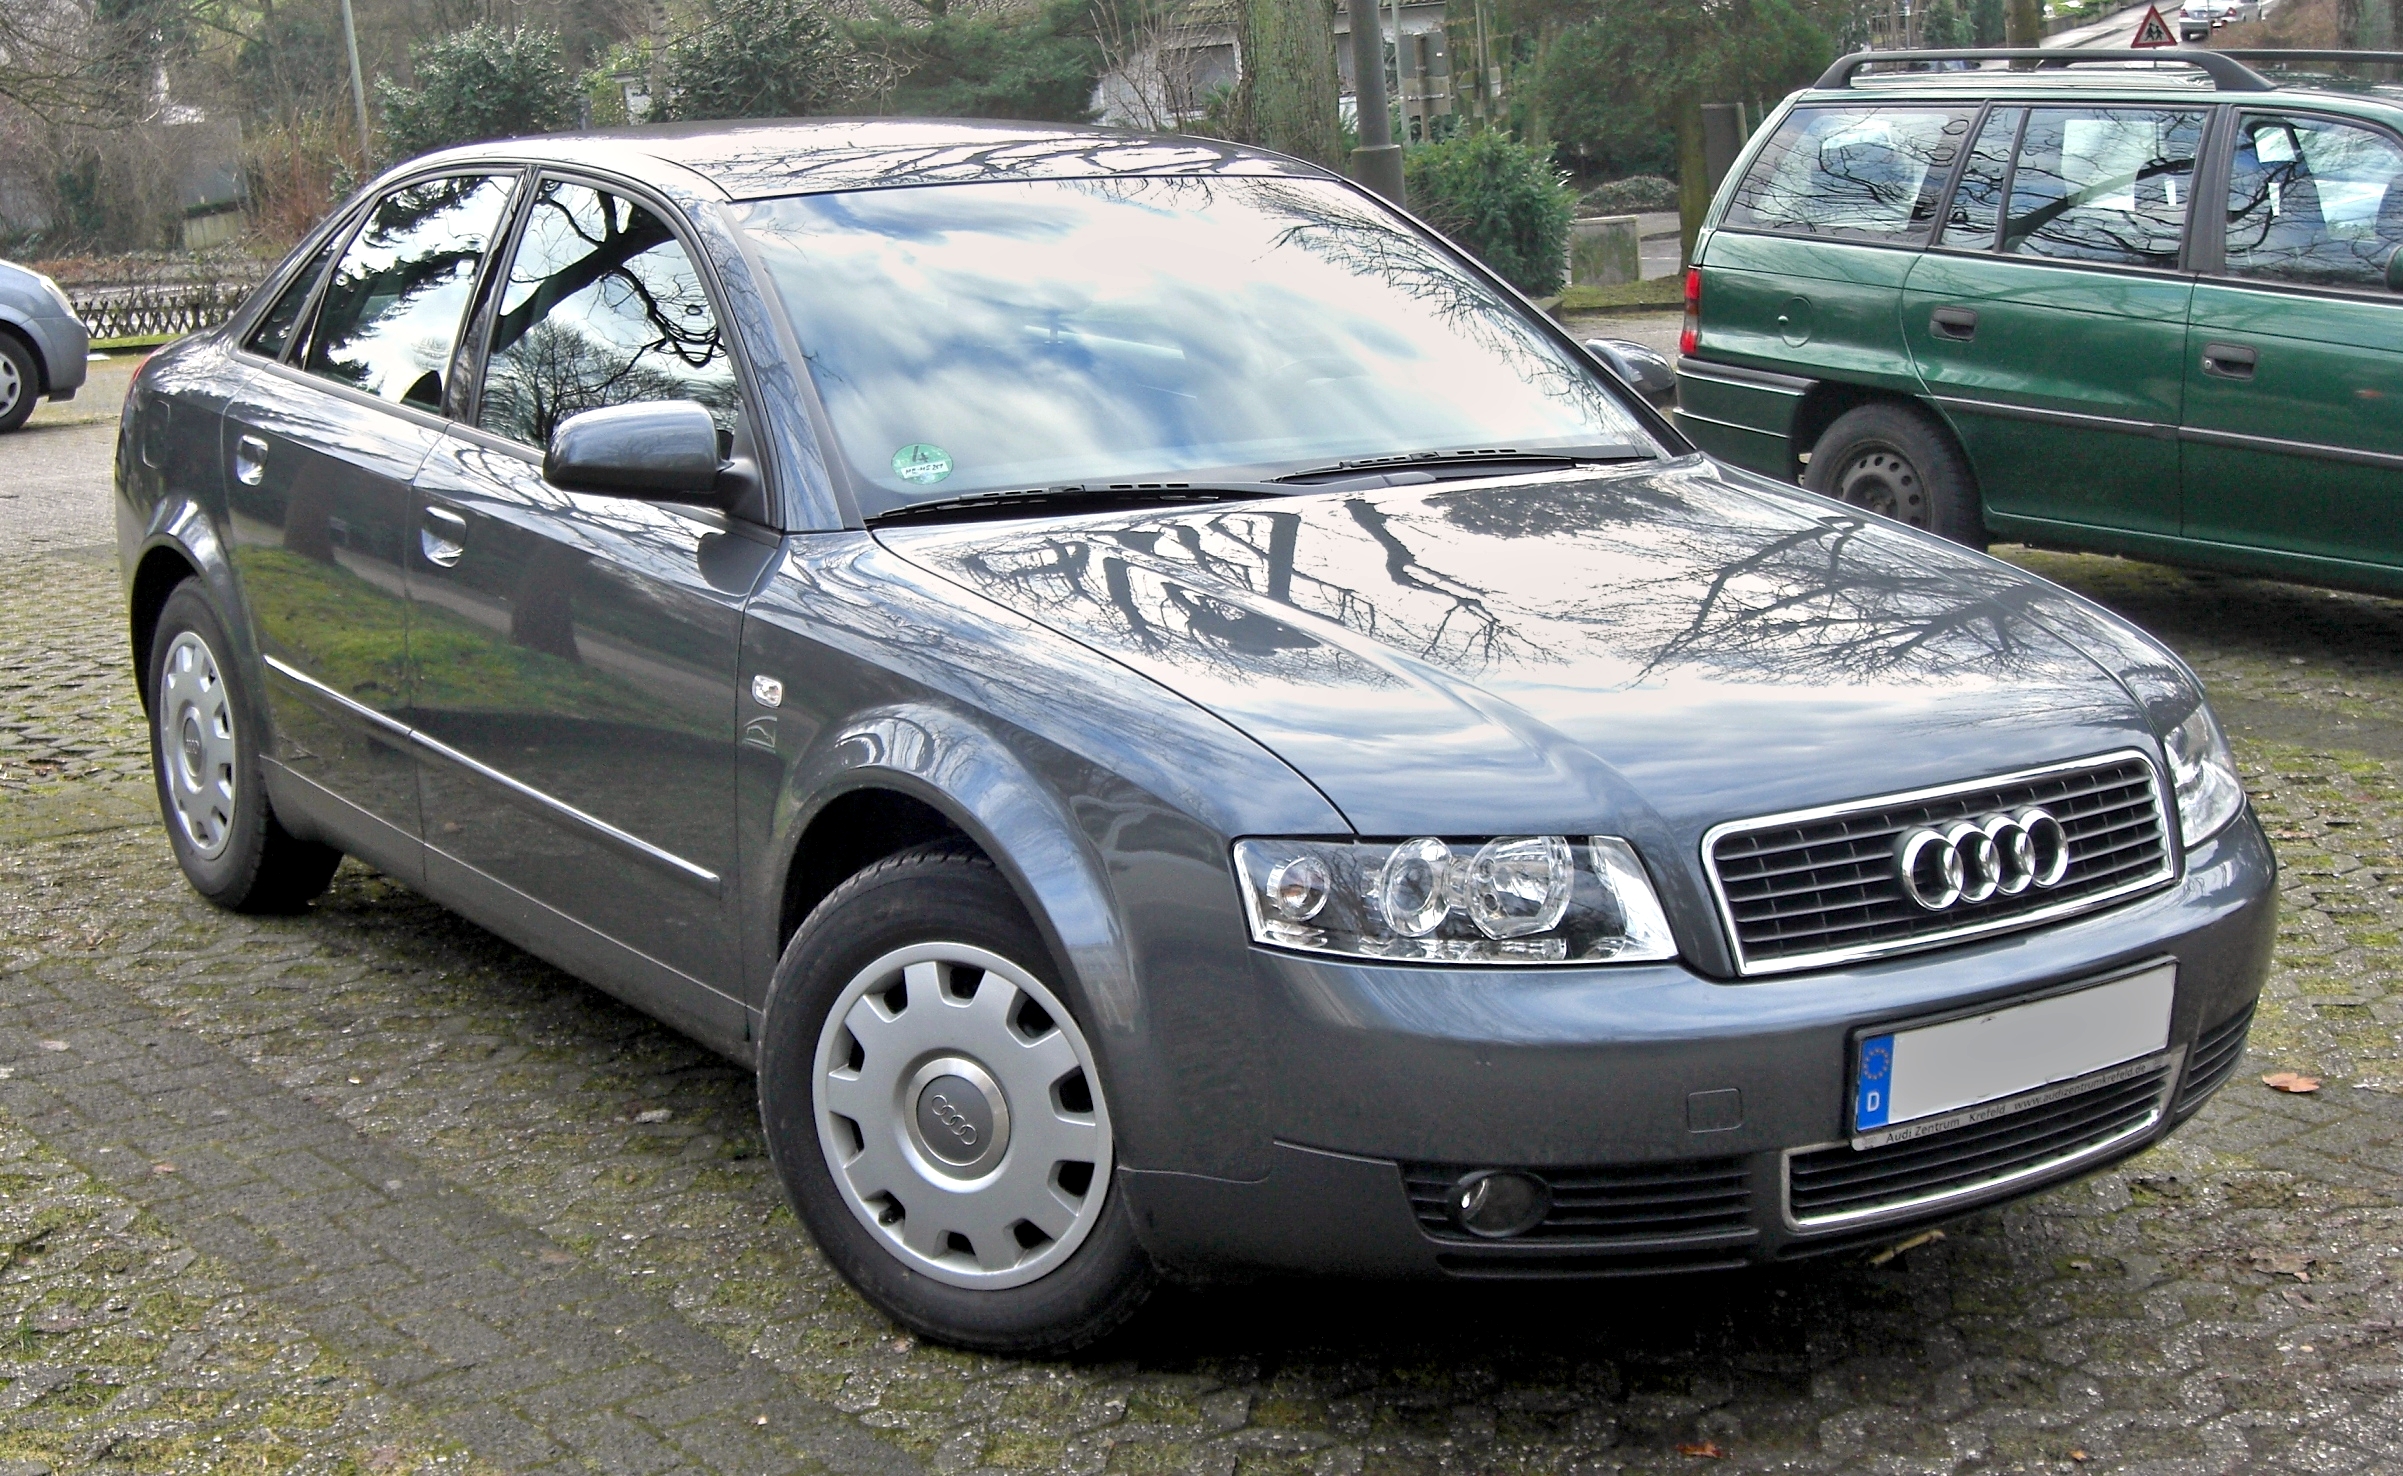 File:Audi A4 front.JPG - Wikimedia Commons